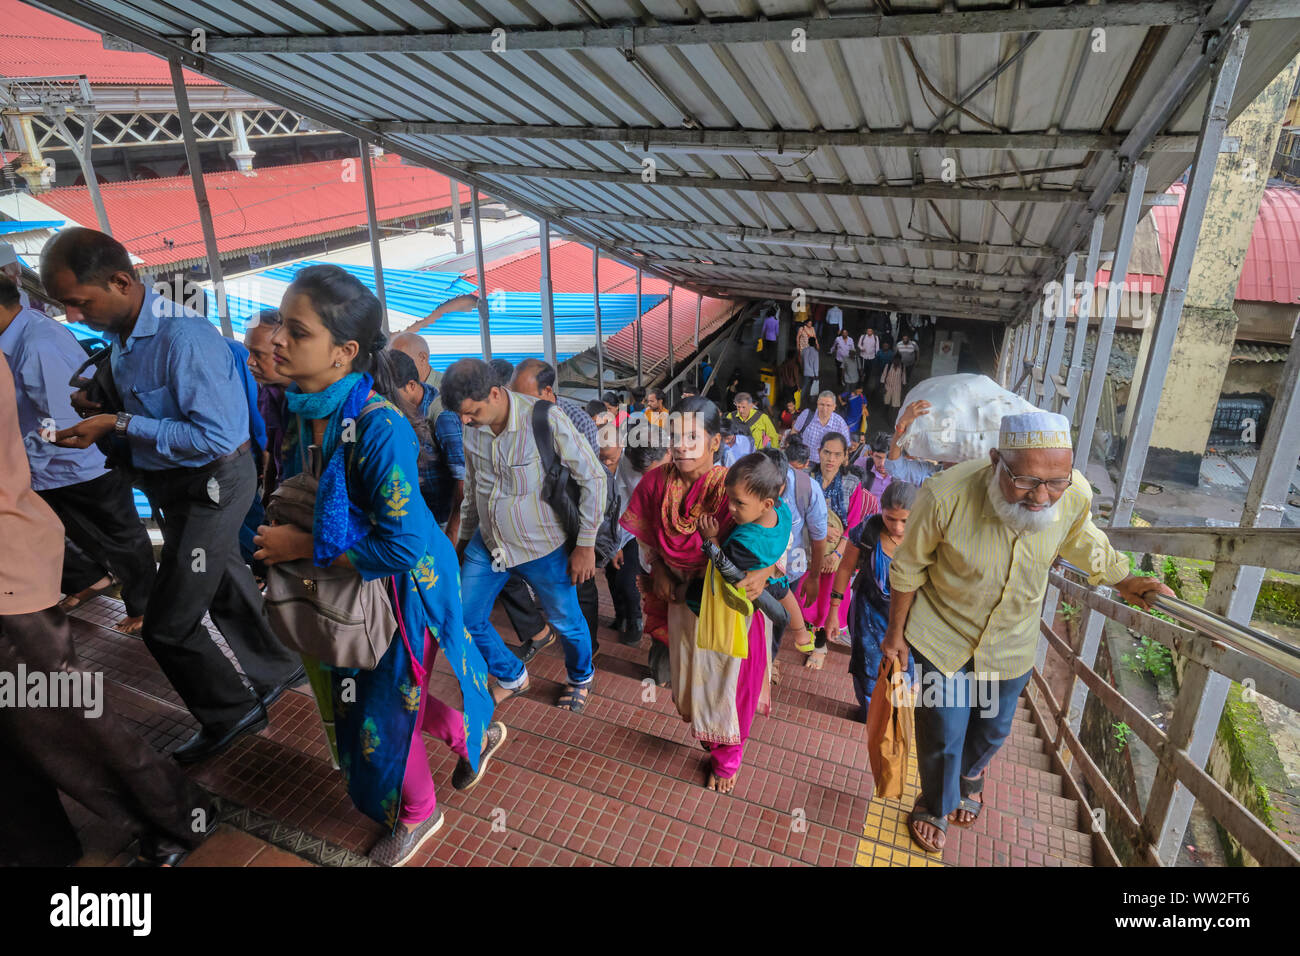 Passengers of local trains at Byculla Station in Mumbai, India, crossing over a bridge across the rail platforms Stock Photo